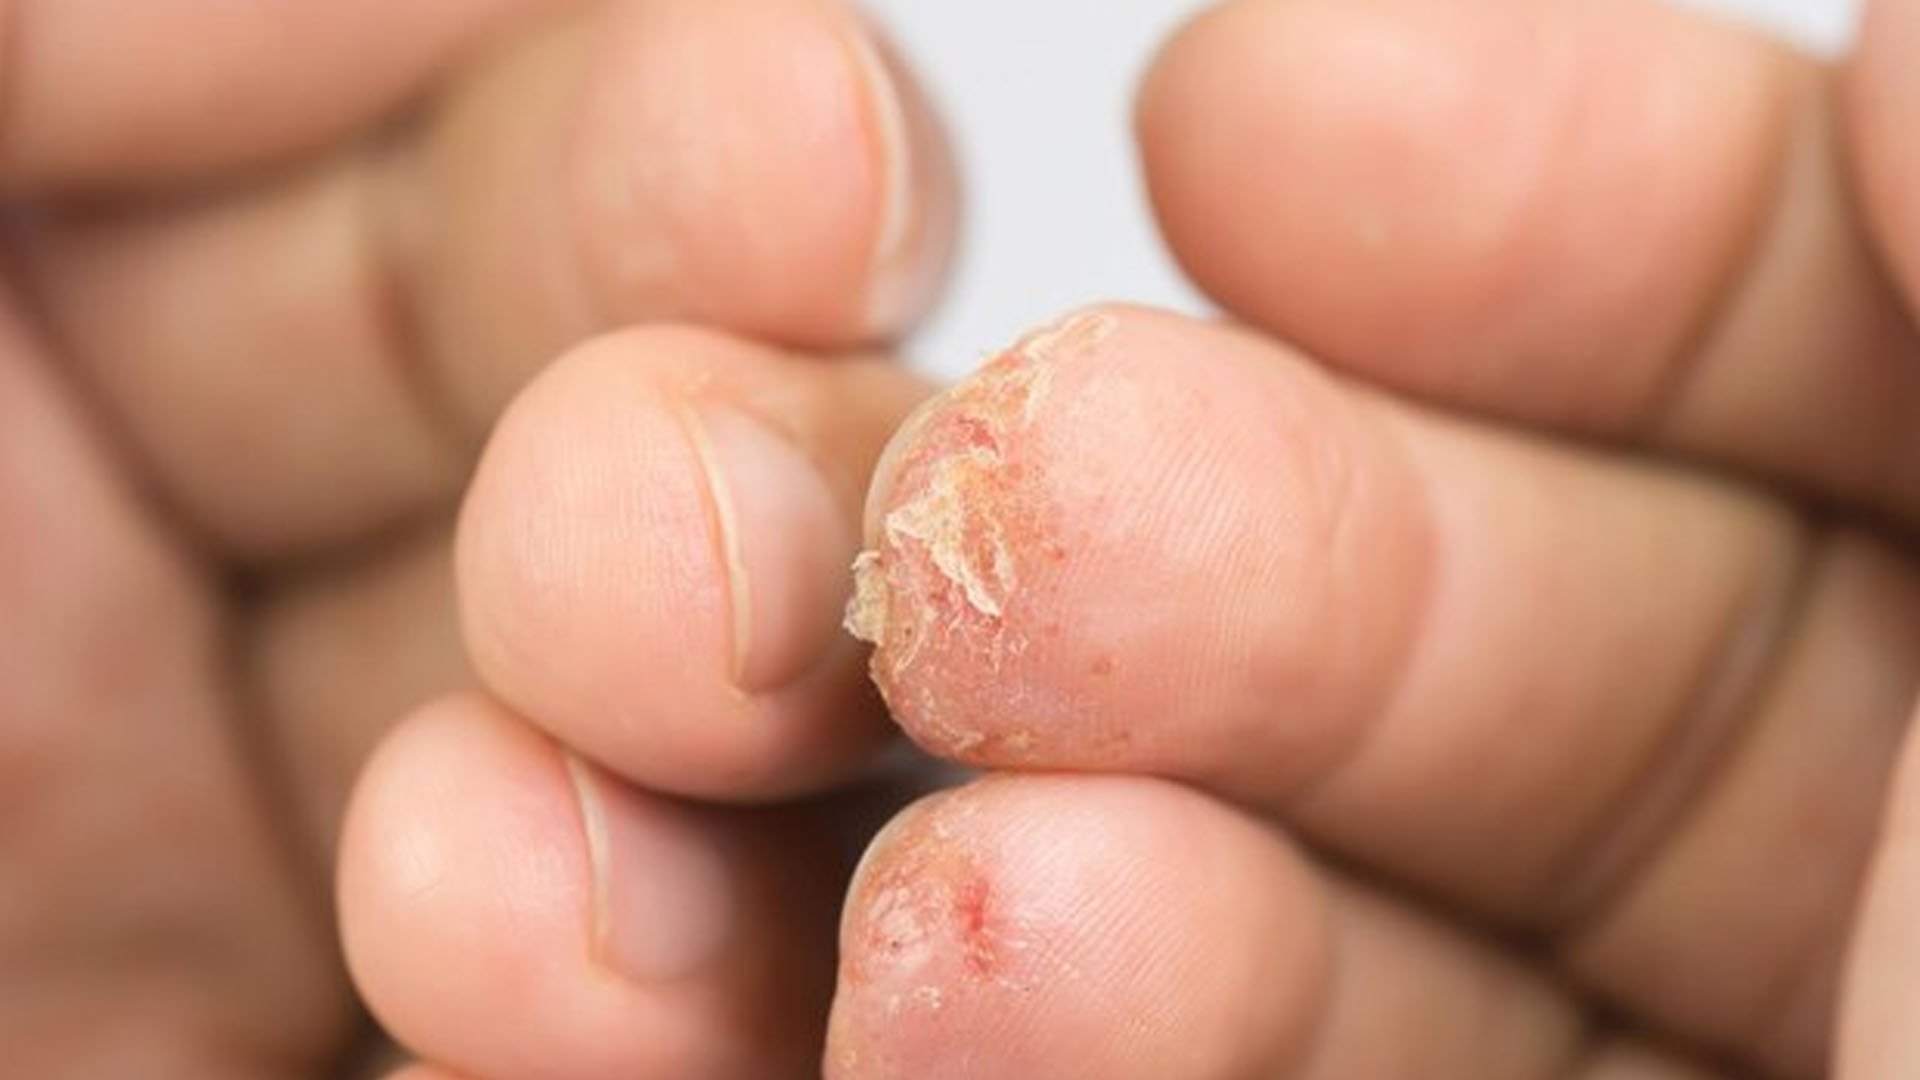 What are the Home Remedies for Fungal Nail Infection?